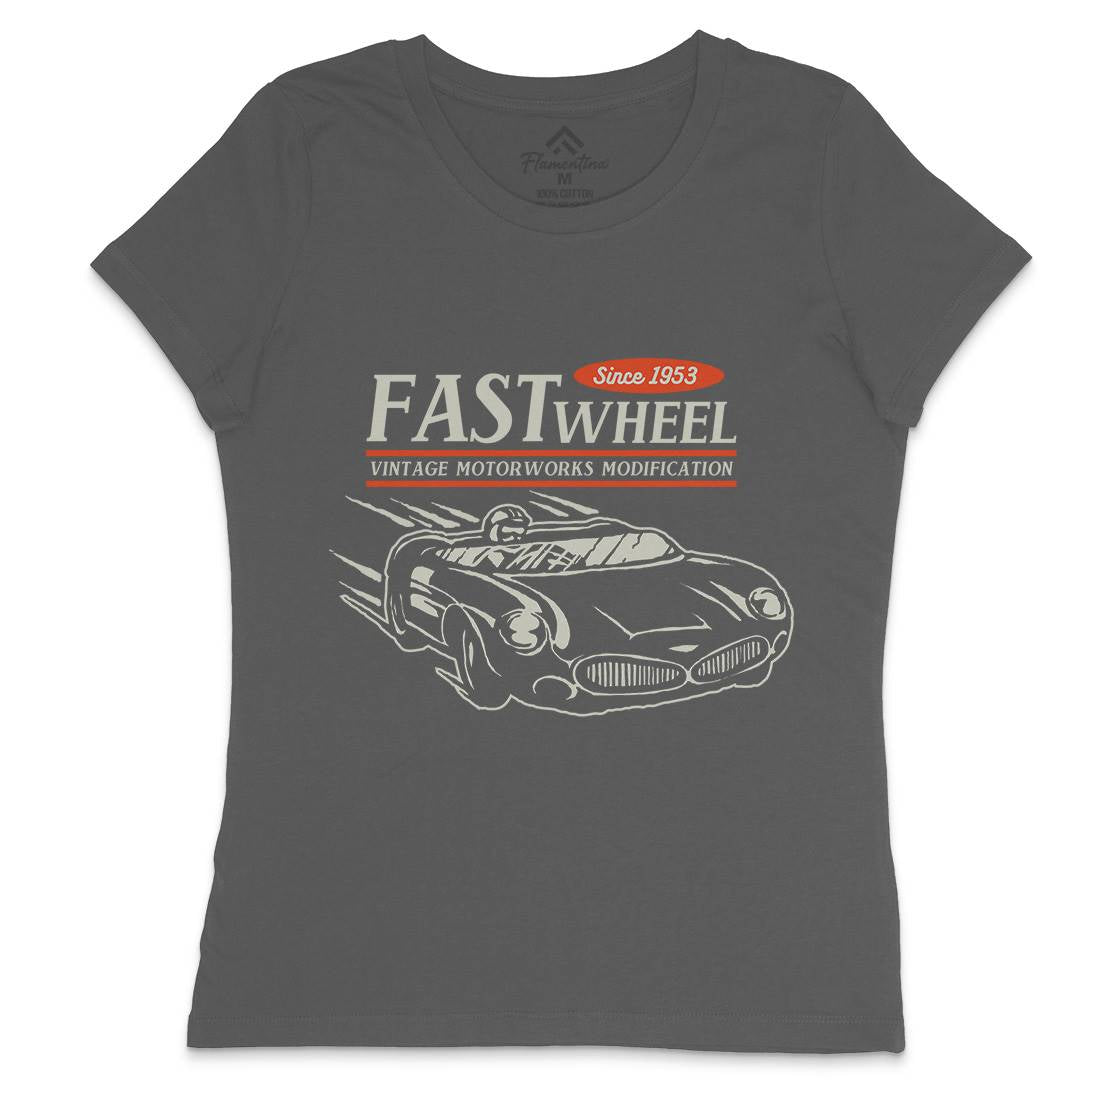 Vintage Racer Speed Womens Crew Neck T-Shirt Cars A493